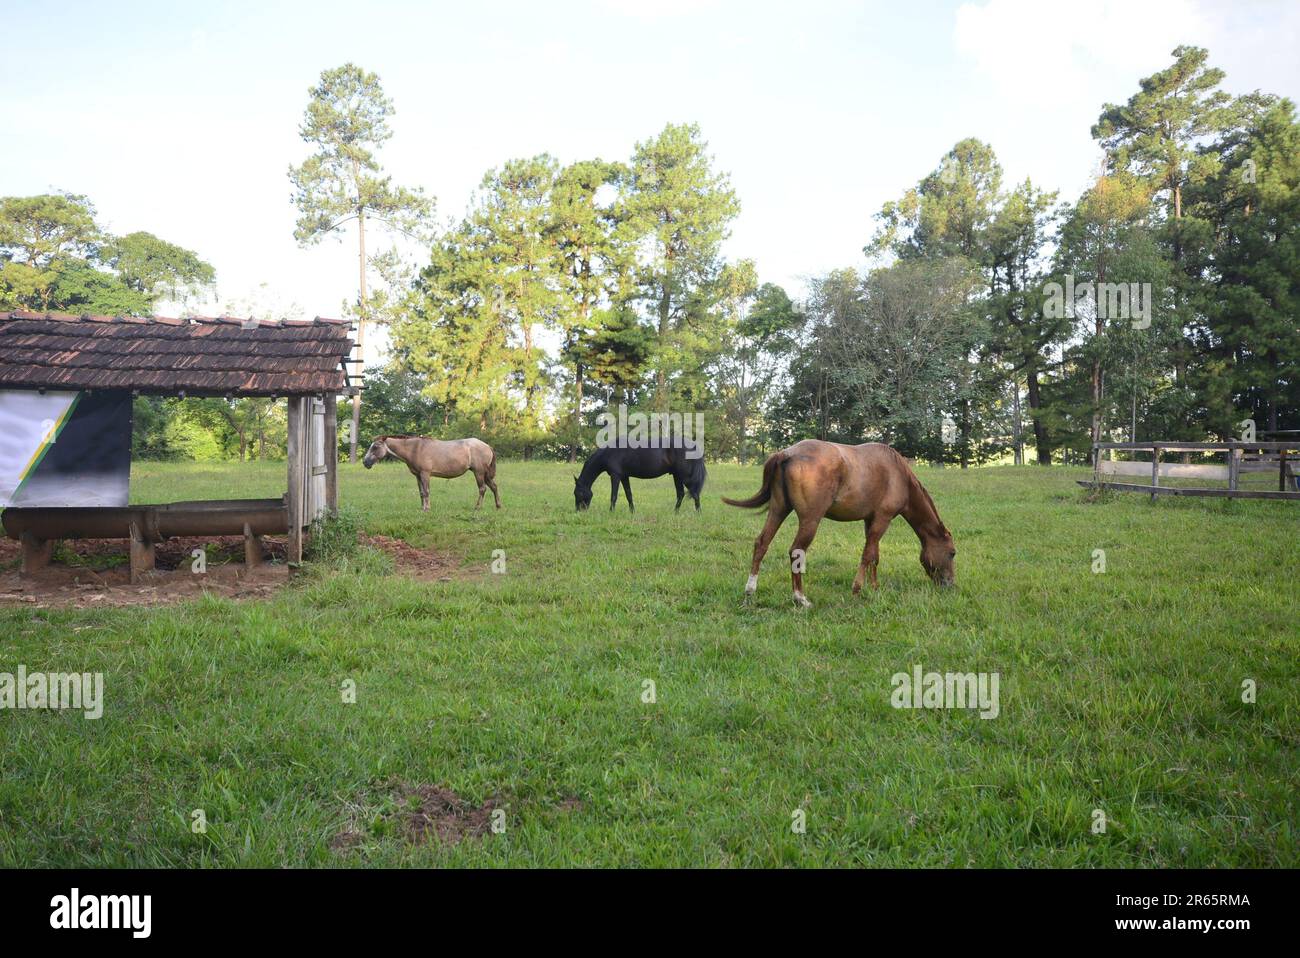 Horses grazing on grass on rural farm next to animal feed place with trees in background Stock Photo